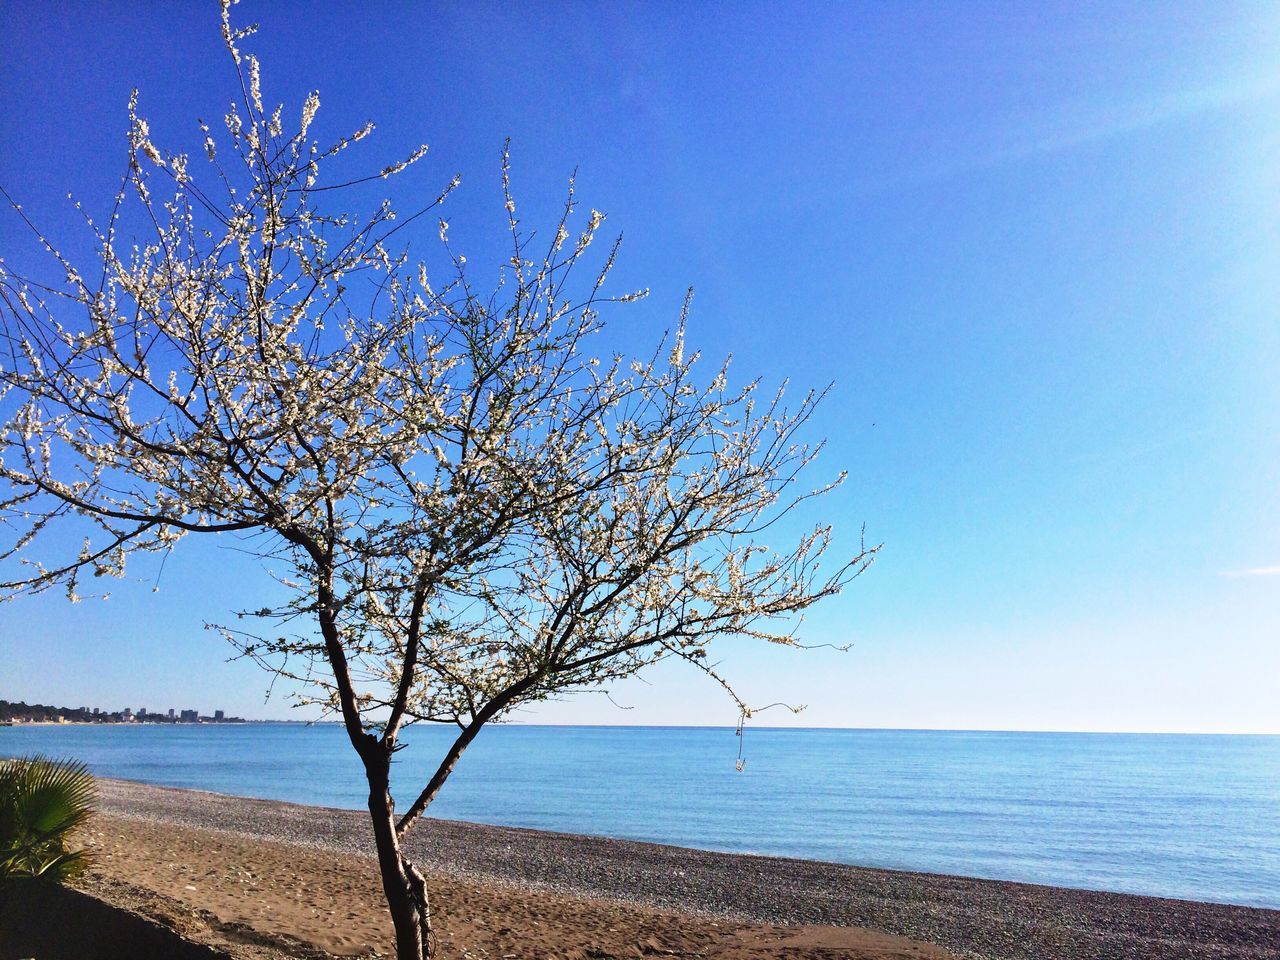 sea, horizon over water, water, tranquility, beach, tranquil scene, scenics, blue, beauty in nature, branch, nature, shore, tree, clear sky, sky, sand, idyllic, tree trunk, outdoors, bare tree